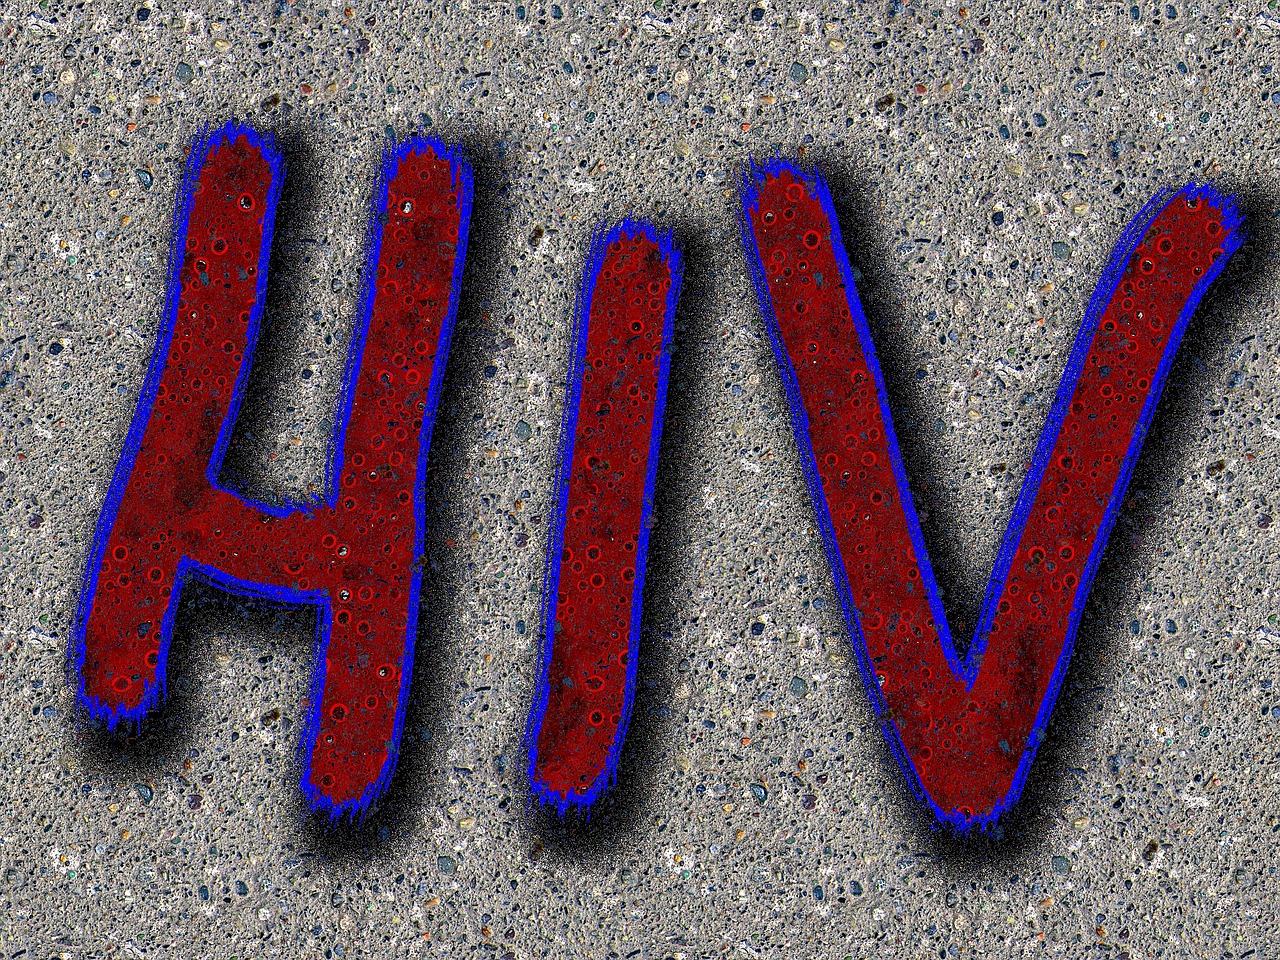 2021 BHIVA指南：HIV-<font color="red">2</font>的管理